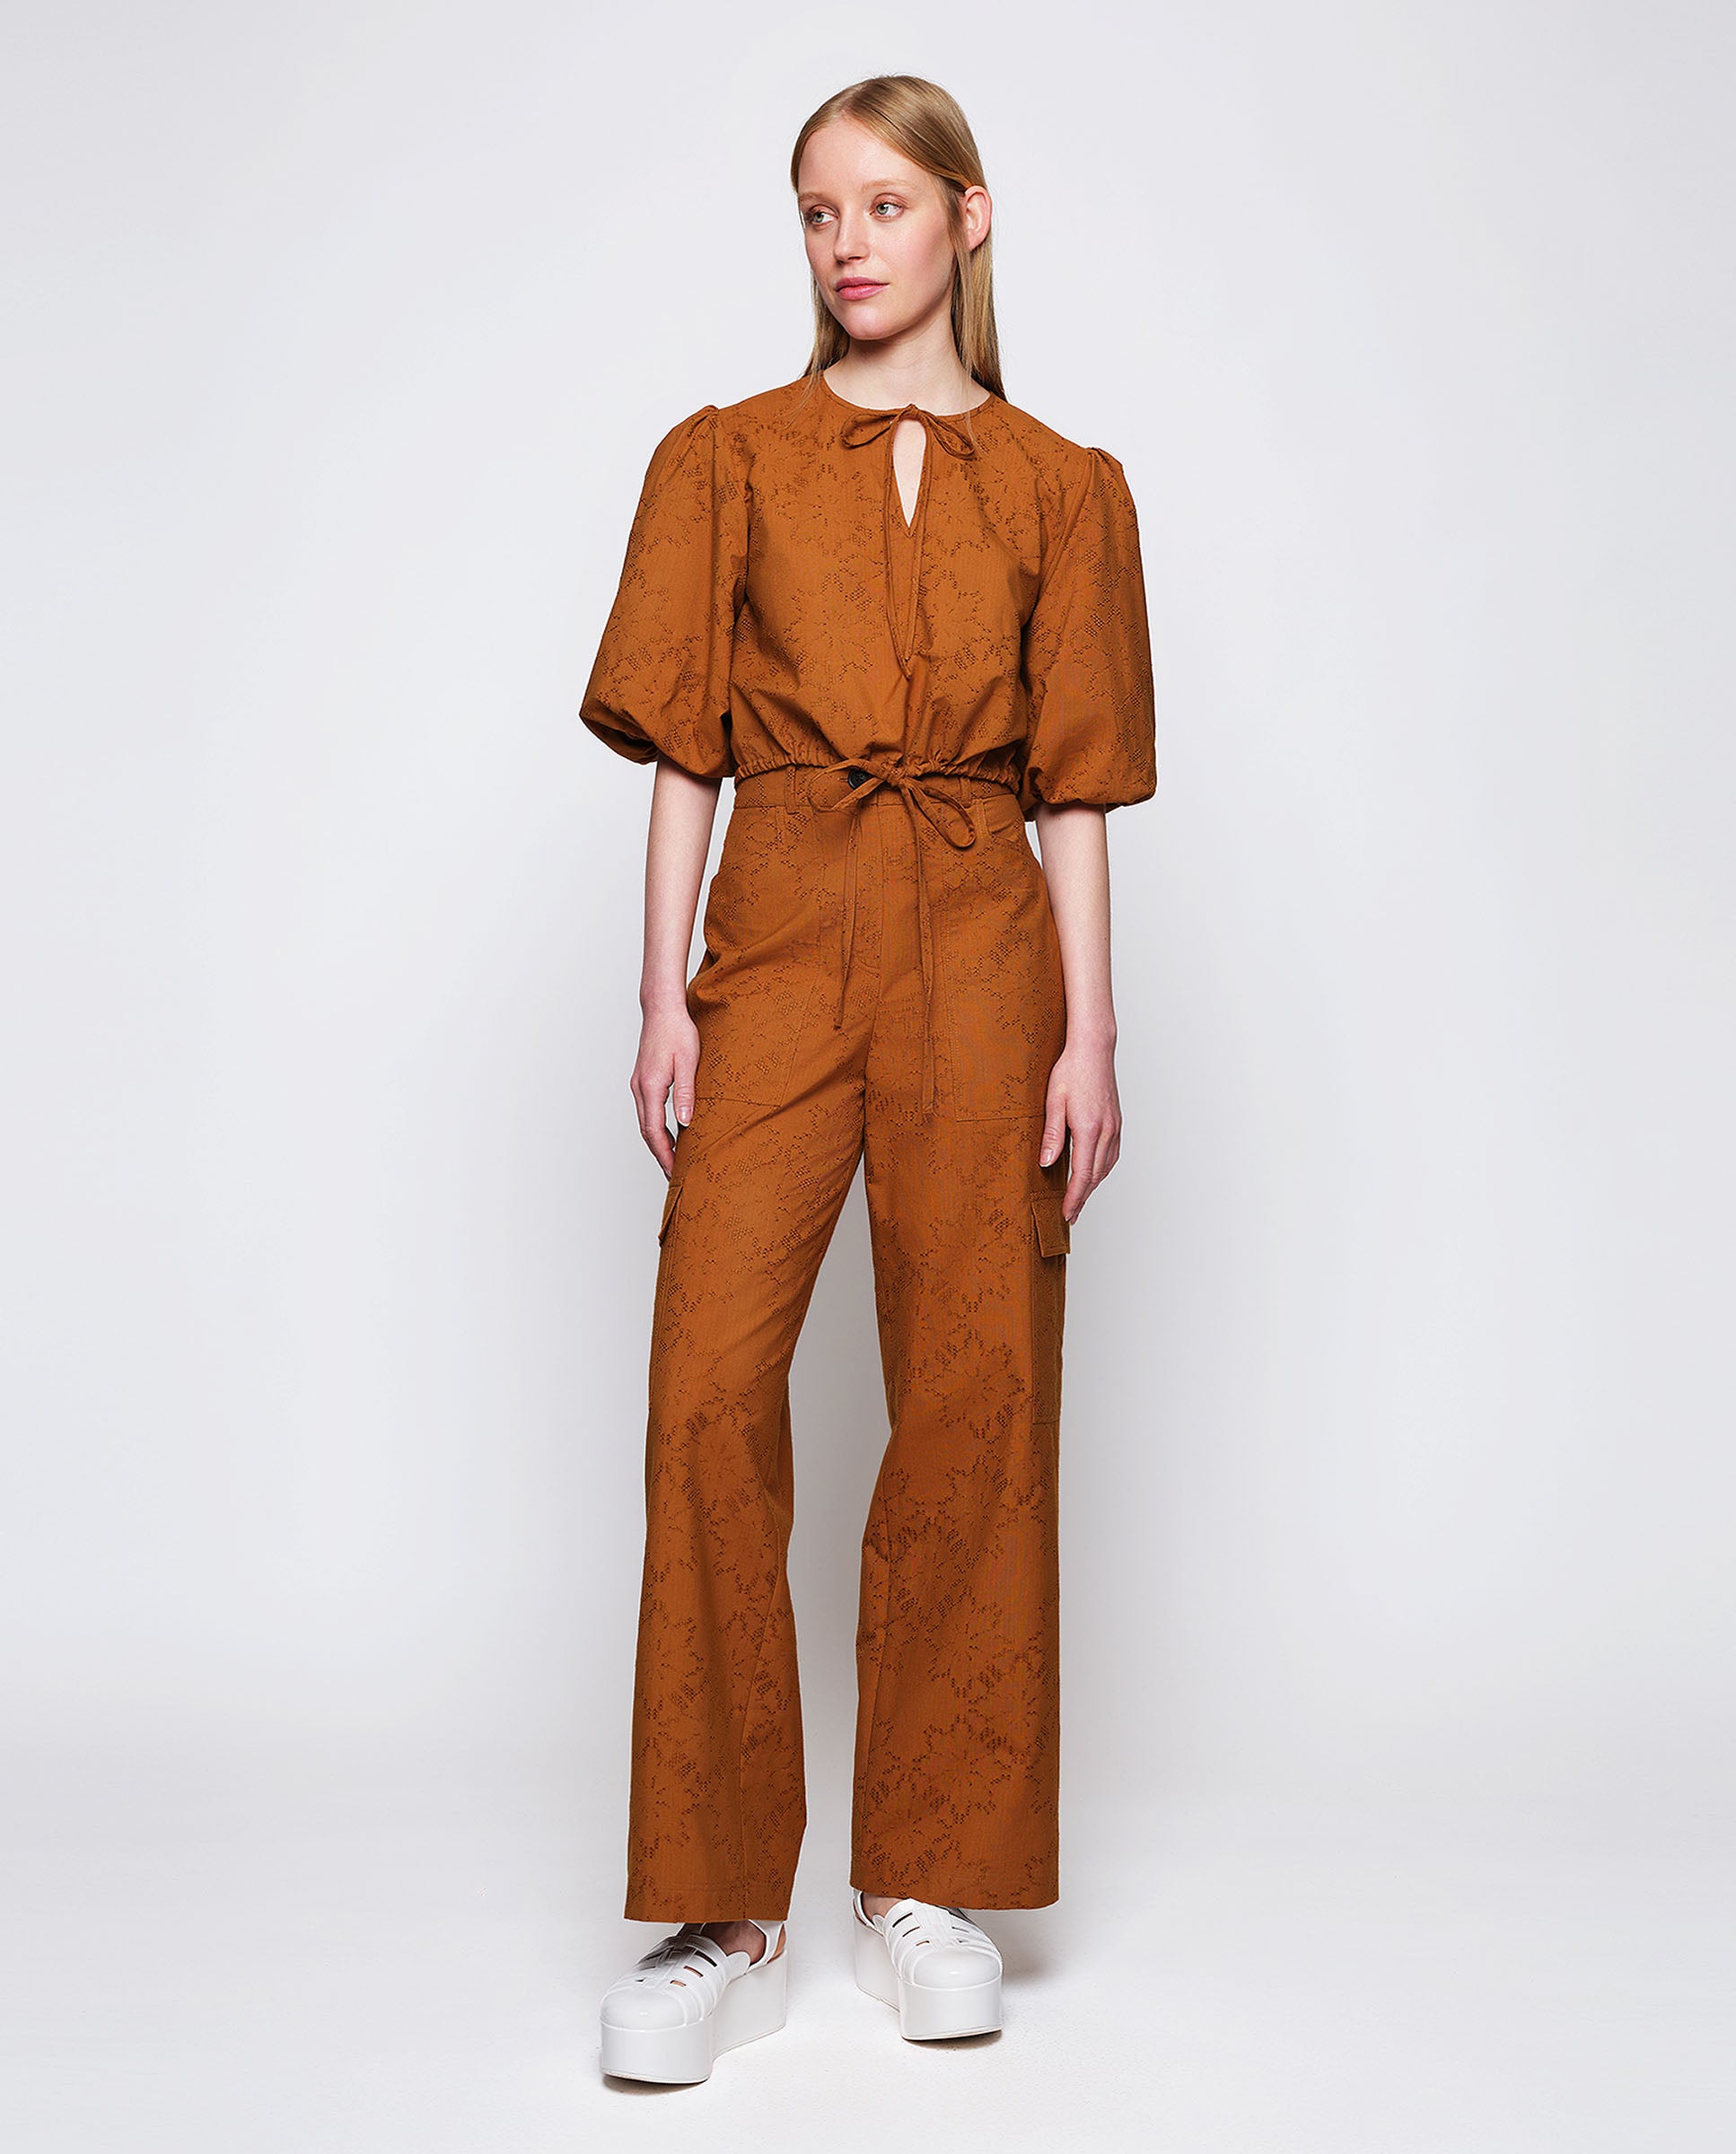 Ginger brown cotton blend cargo trousers by MIRTO